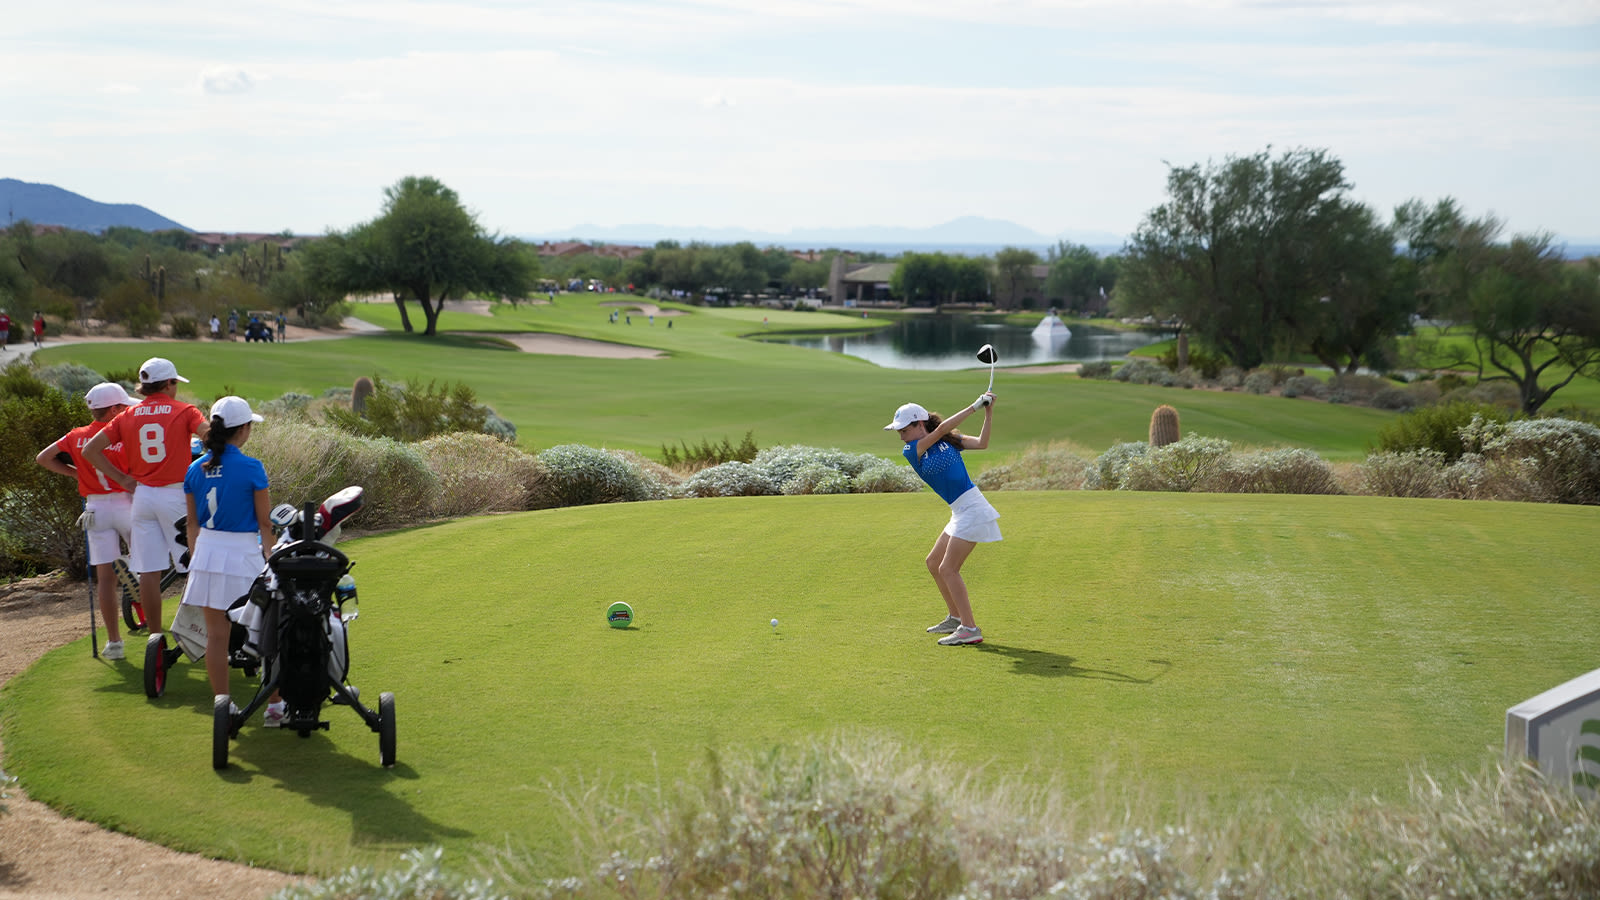 Savannah Laverty of Team New Jersey hits her tee shot on the 18th hole during the second round of the 2022 National Car Rental PGA Jr. League Championship at Grayhawk Golf Club on October 8, 2022 in Scottsdale, Arizona. (Photo by Darren Carroll/PGA of America)